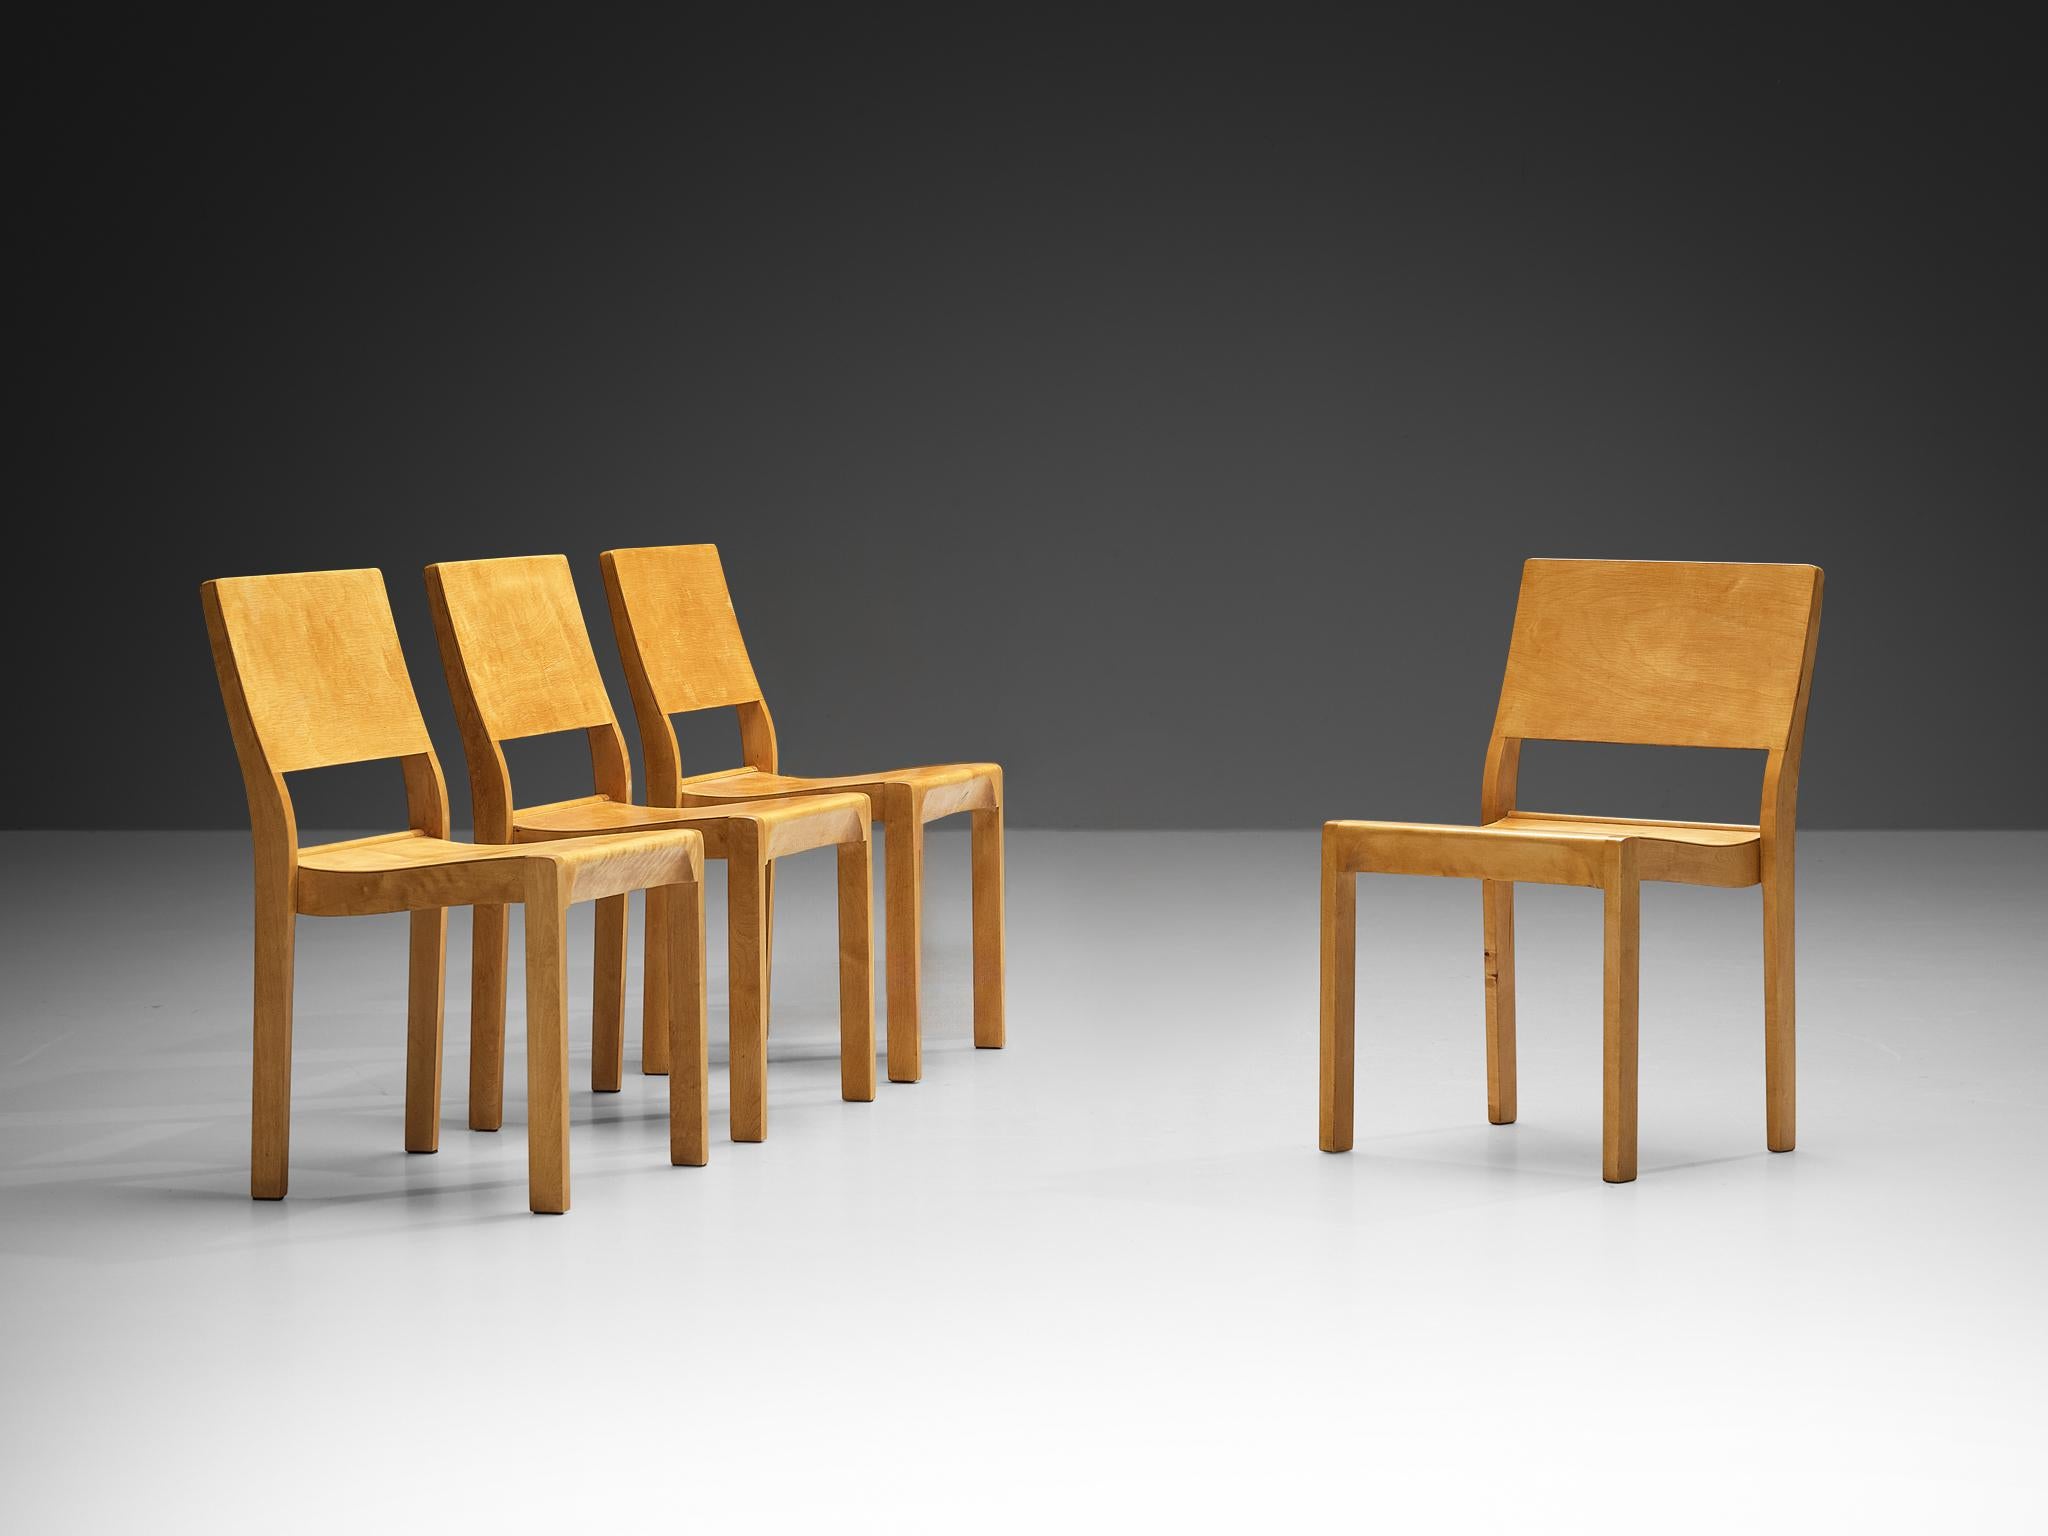 Alvar Aalto for Artek, dining chairs, model '11', birch, plywood, Finland, design 1929

Lovely stackable chairs designed by Alvar Aalto in 1929. This set is manufactured by Artek Finland. These chairs are made in a fresh and natural birch and